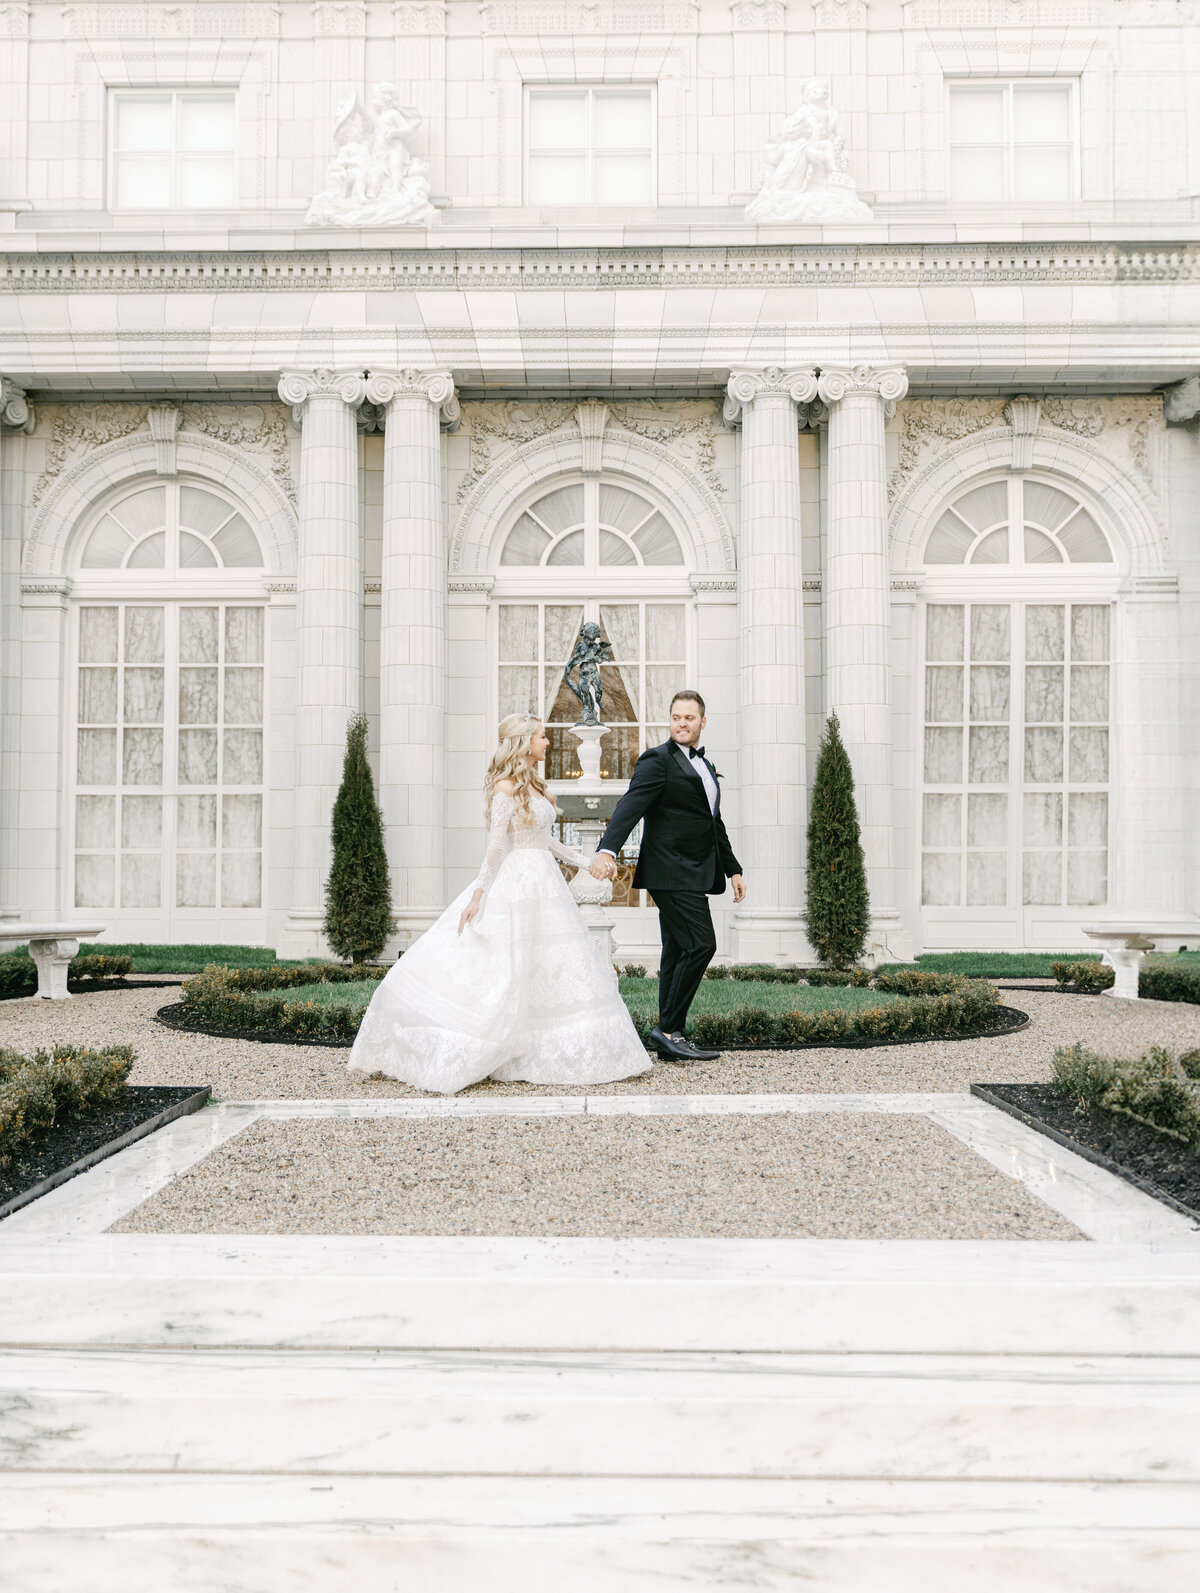 Rosecliff-Mansion-Weddingphotography01288 copy 2